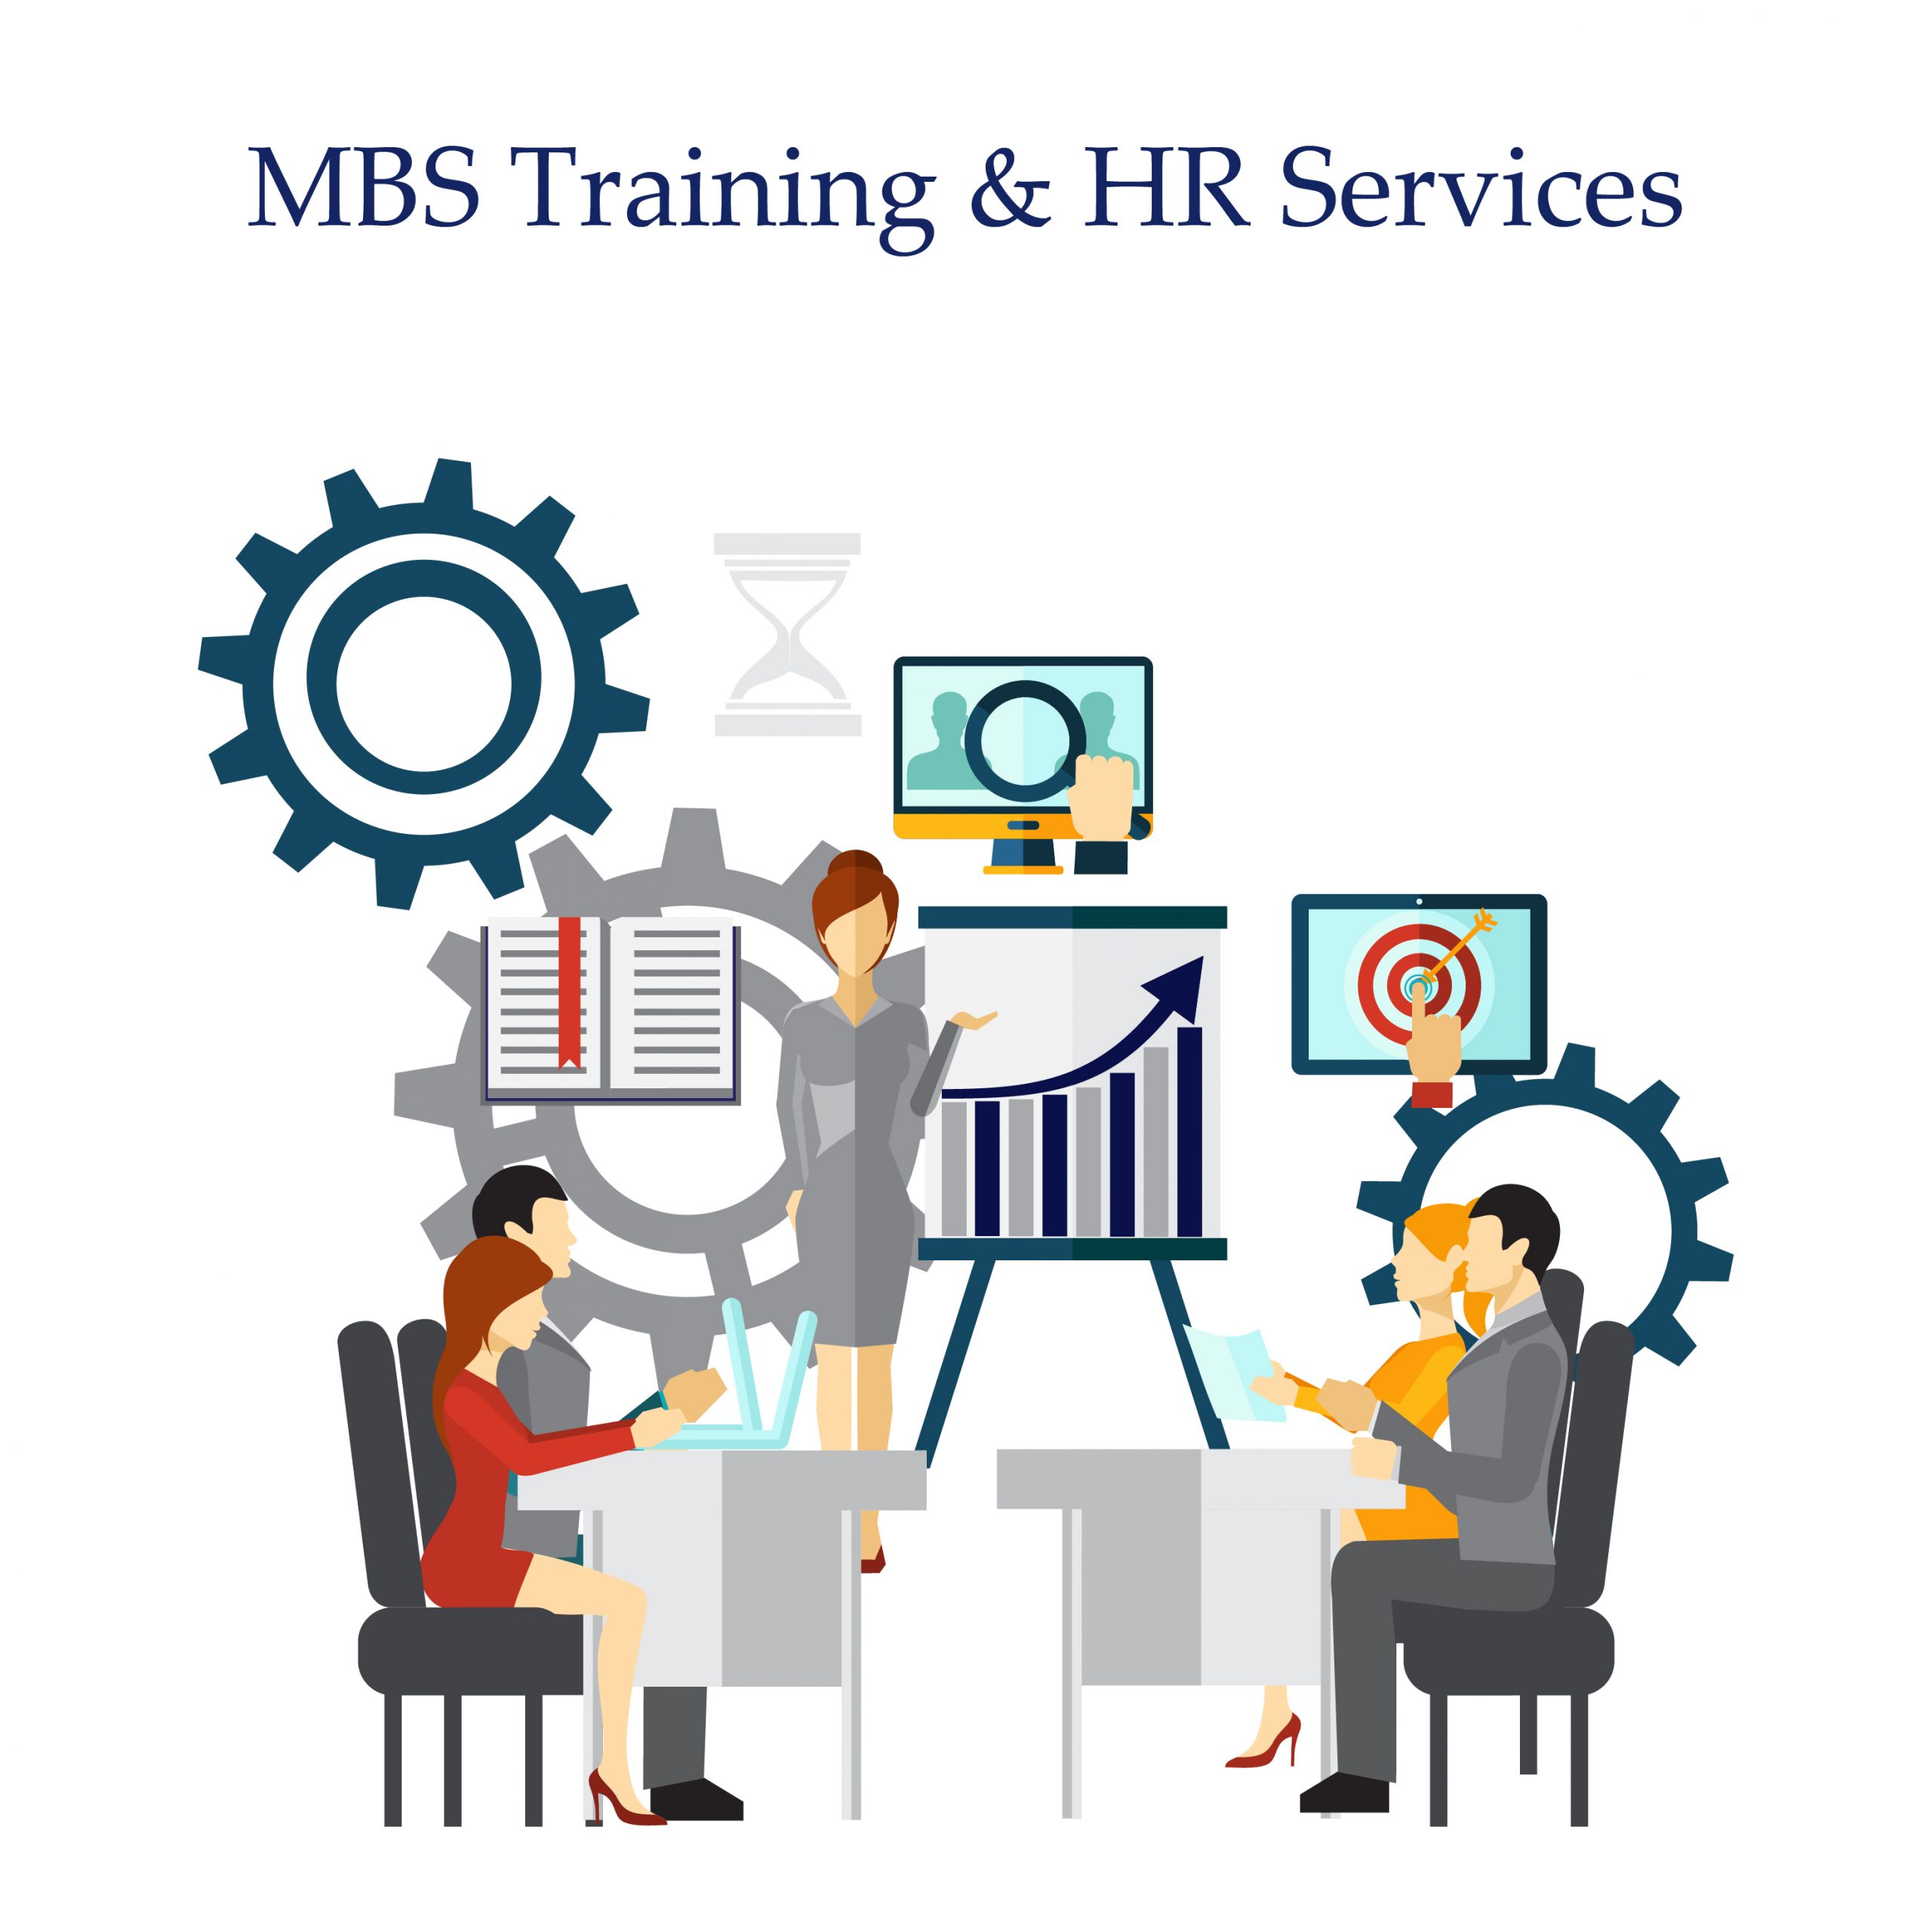 MBS Training & HR Services